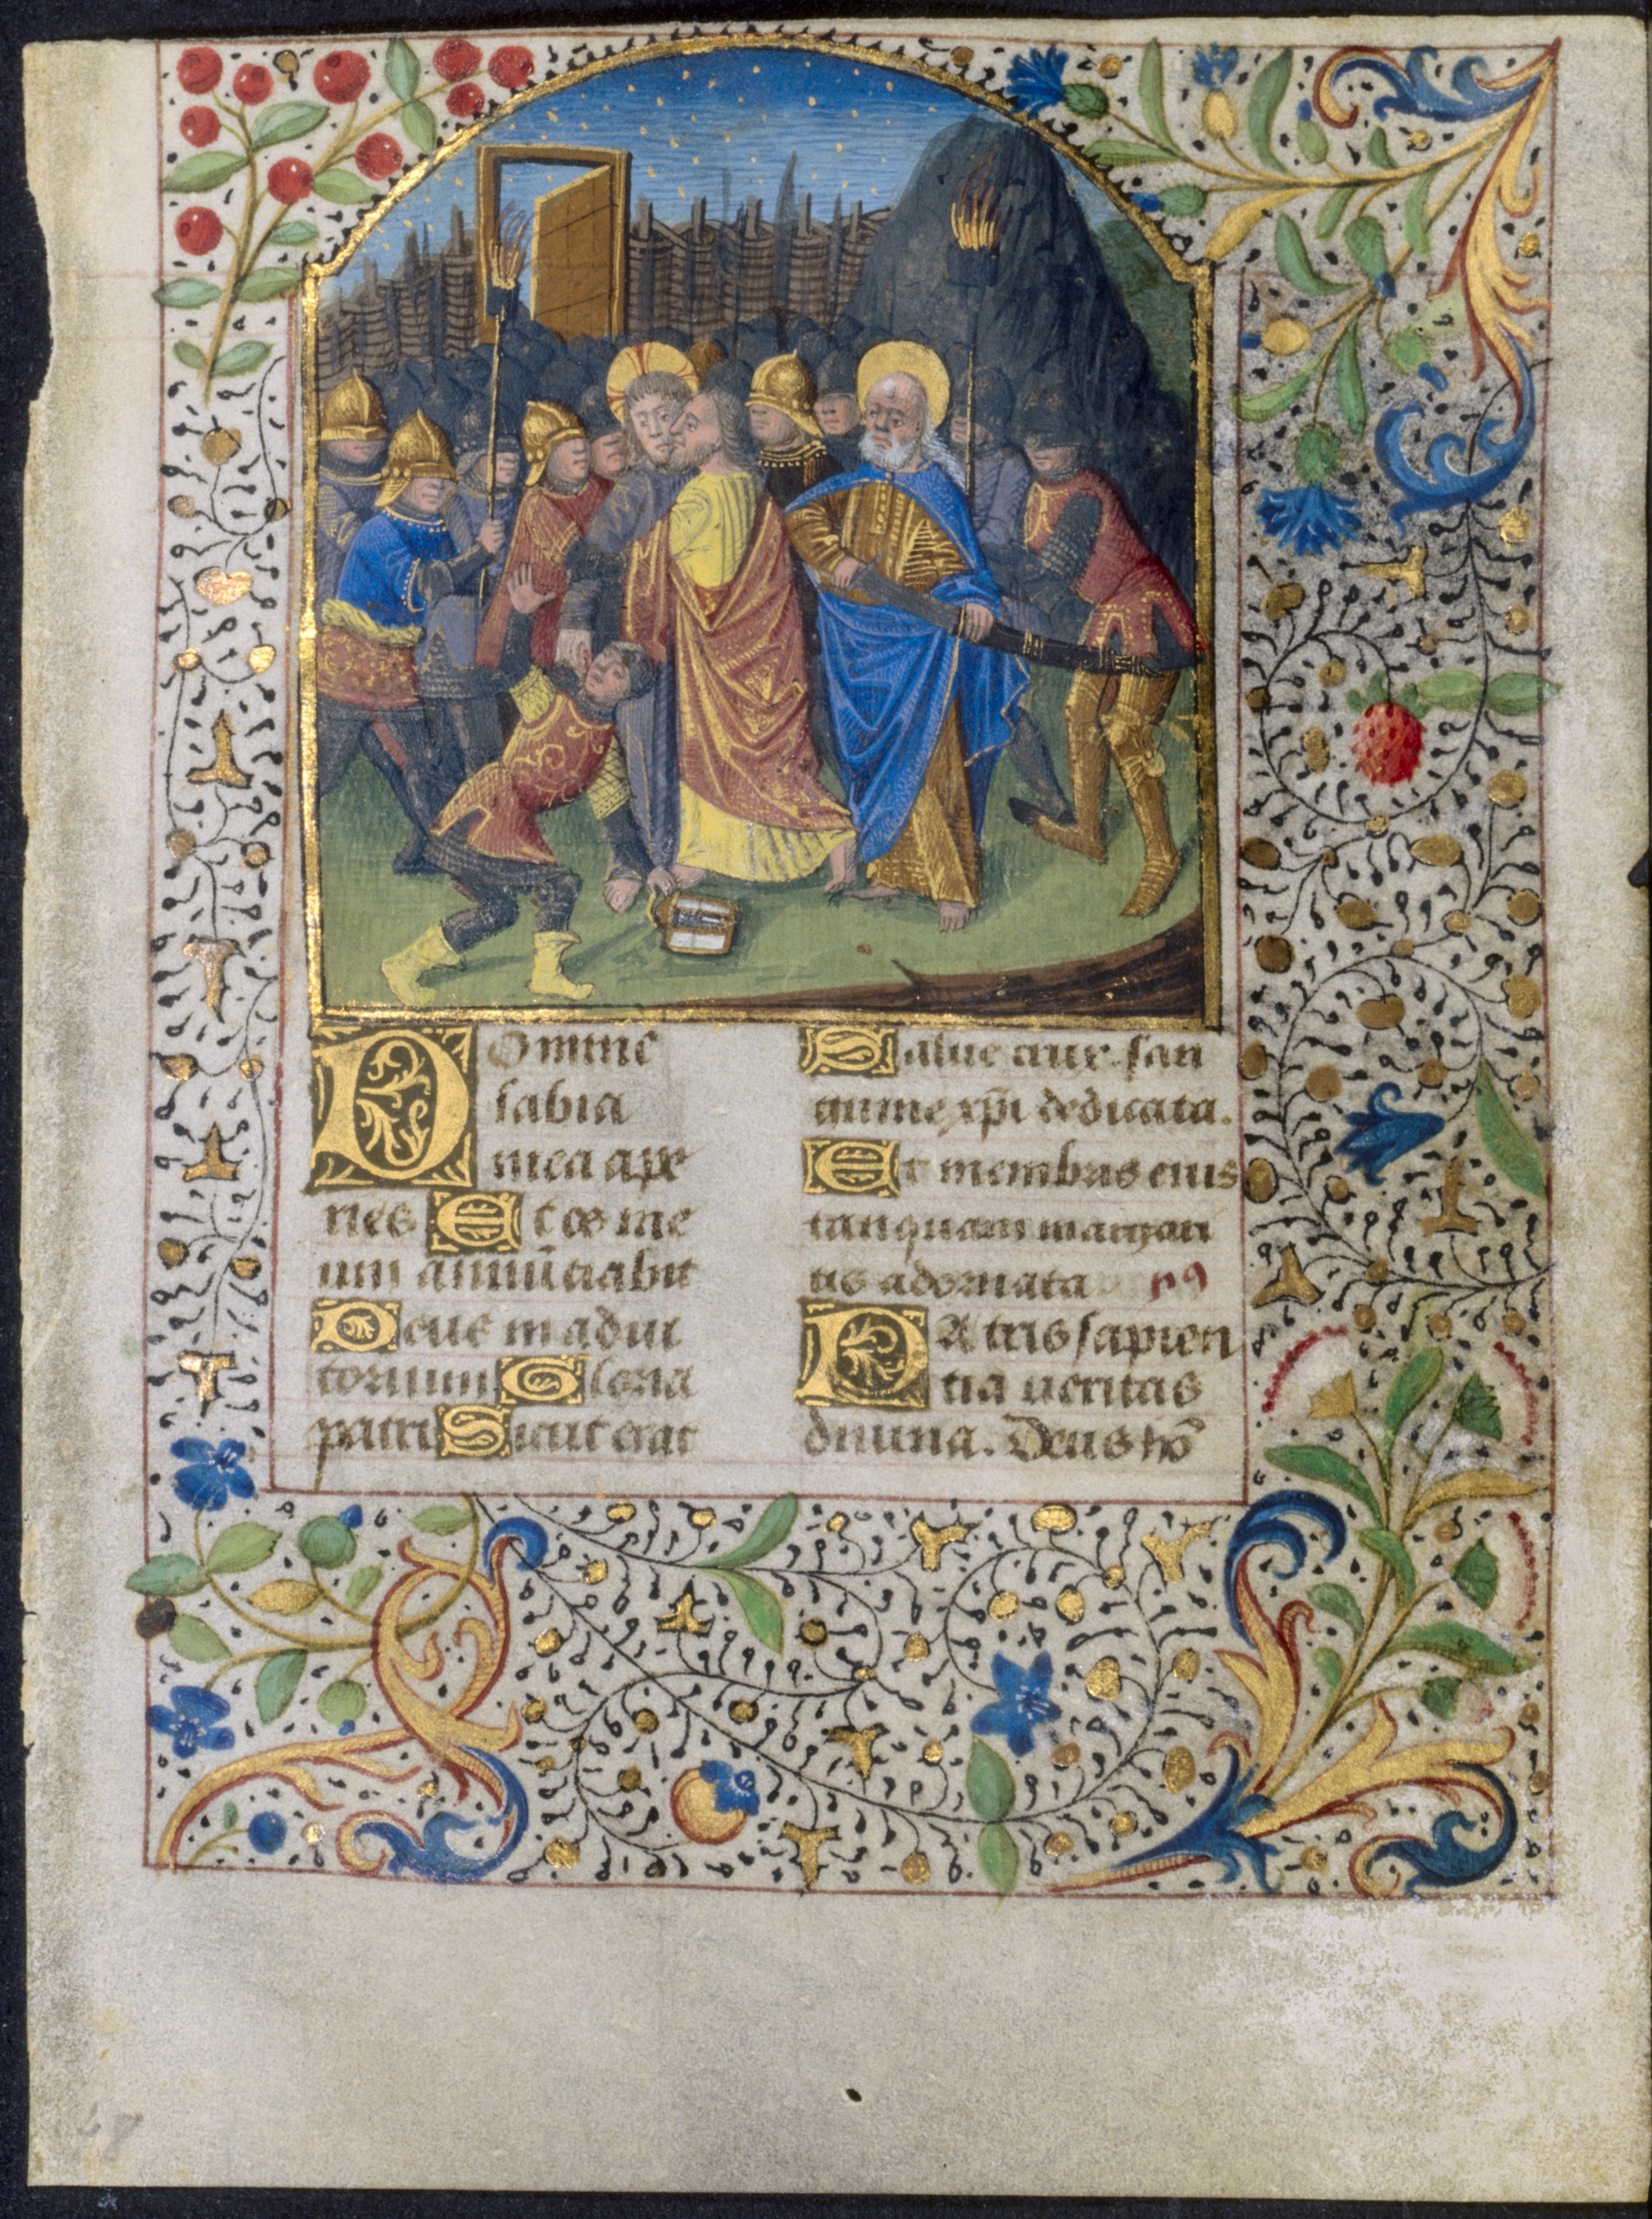 Leaf from a Book of Hours: The Betrayal of Christ